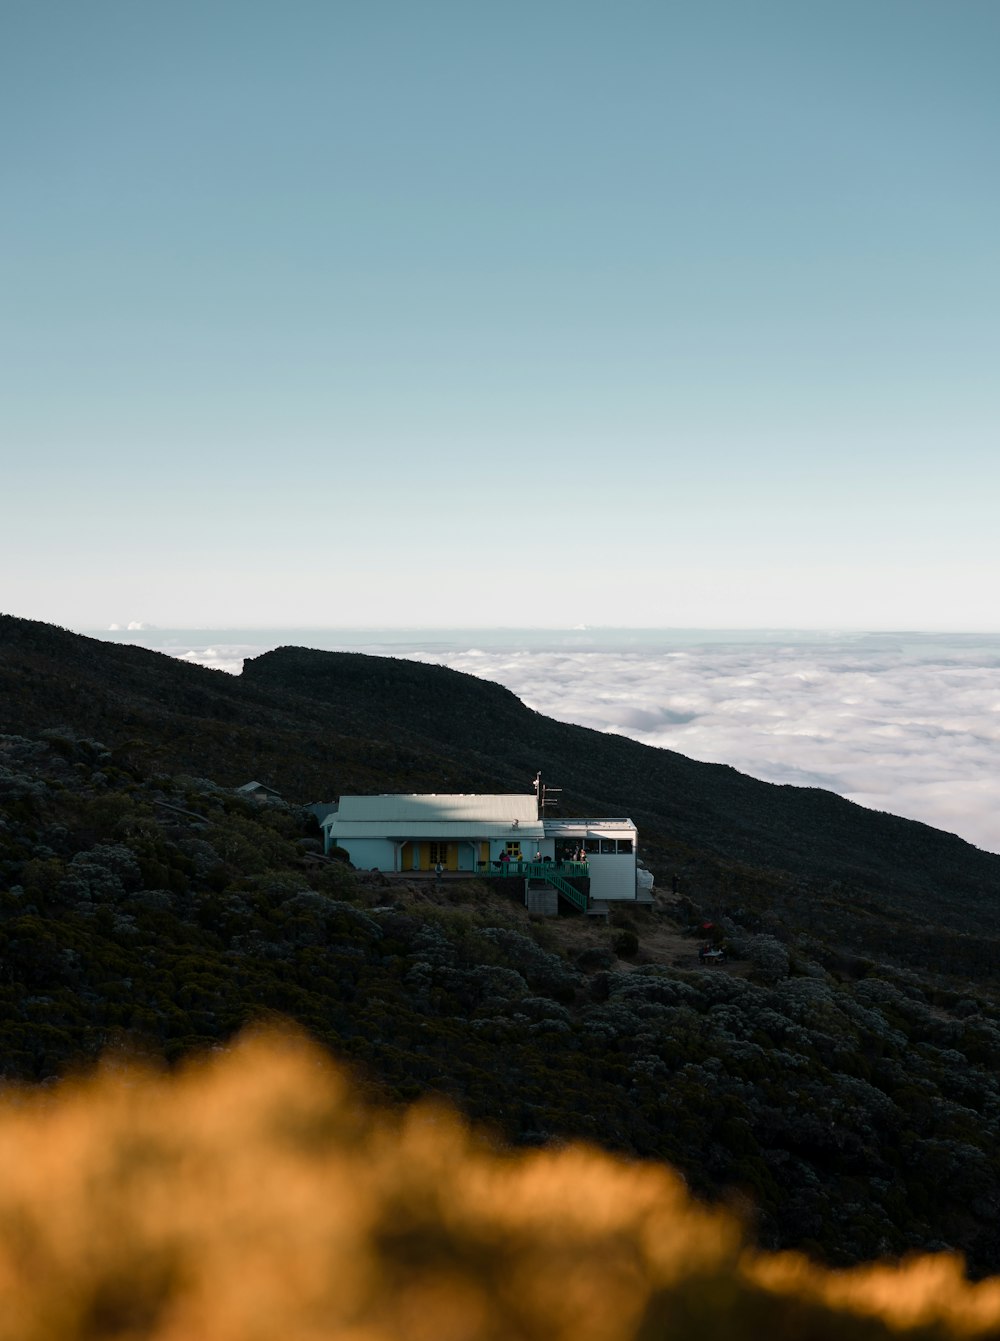 a house on a hill above the clouds